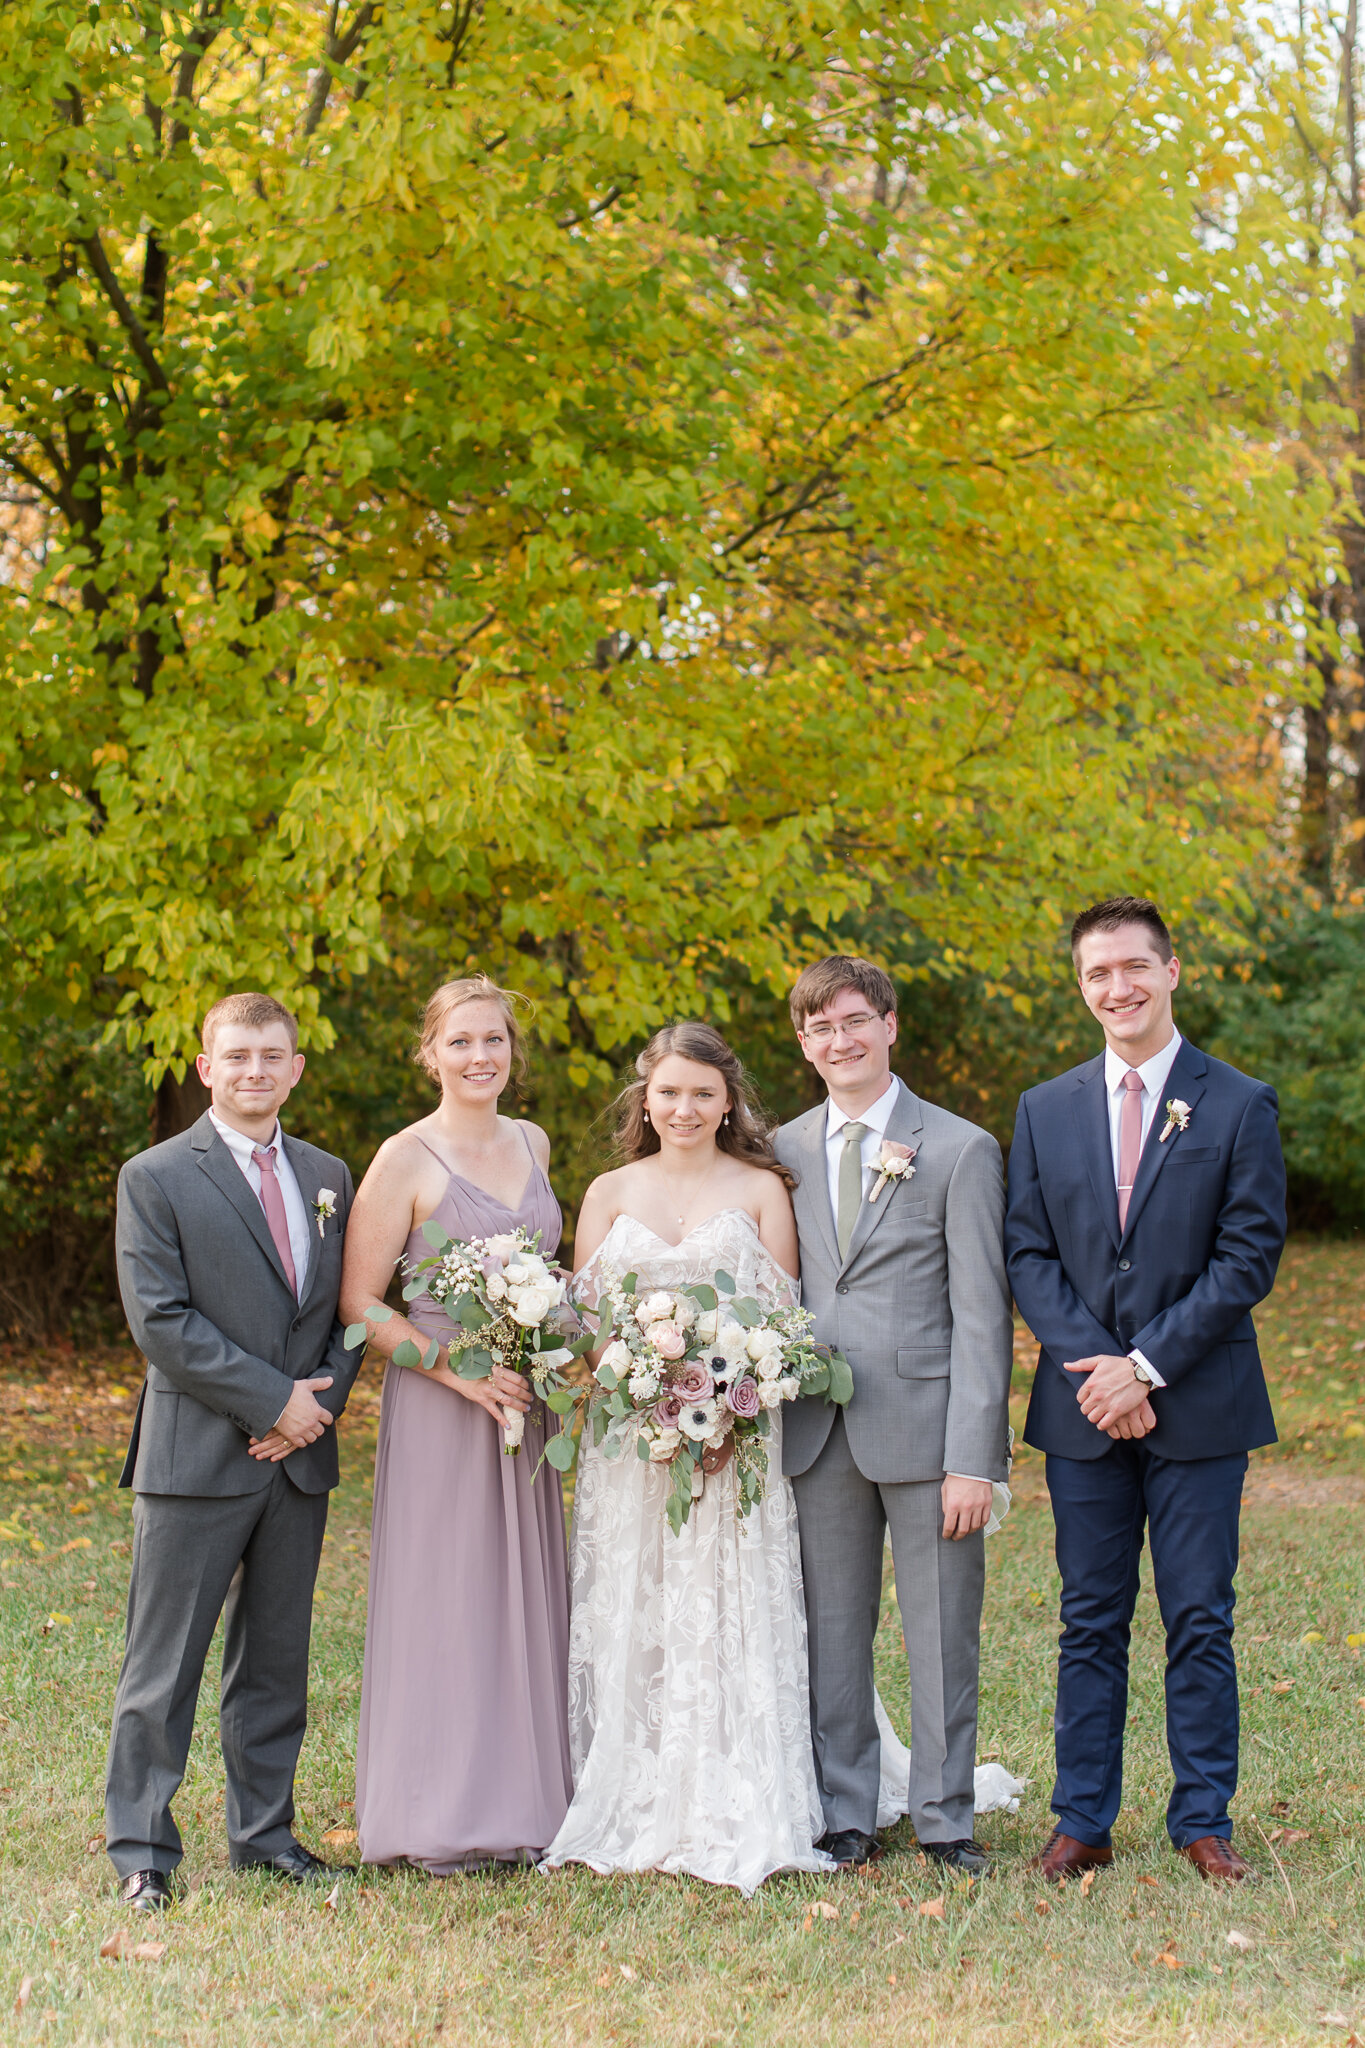 Covid Elopement In Indiana2153.jpg